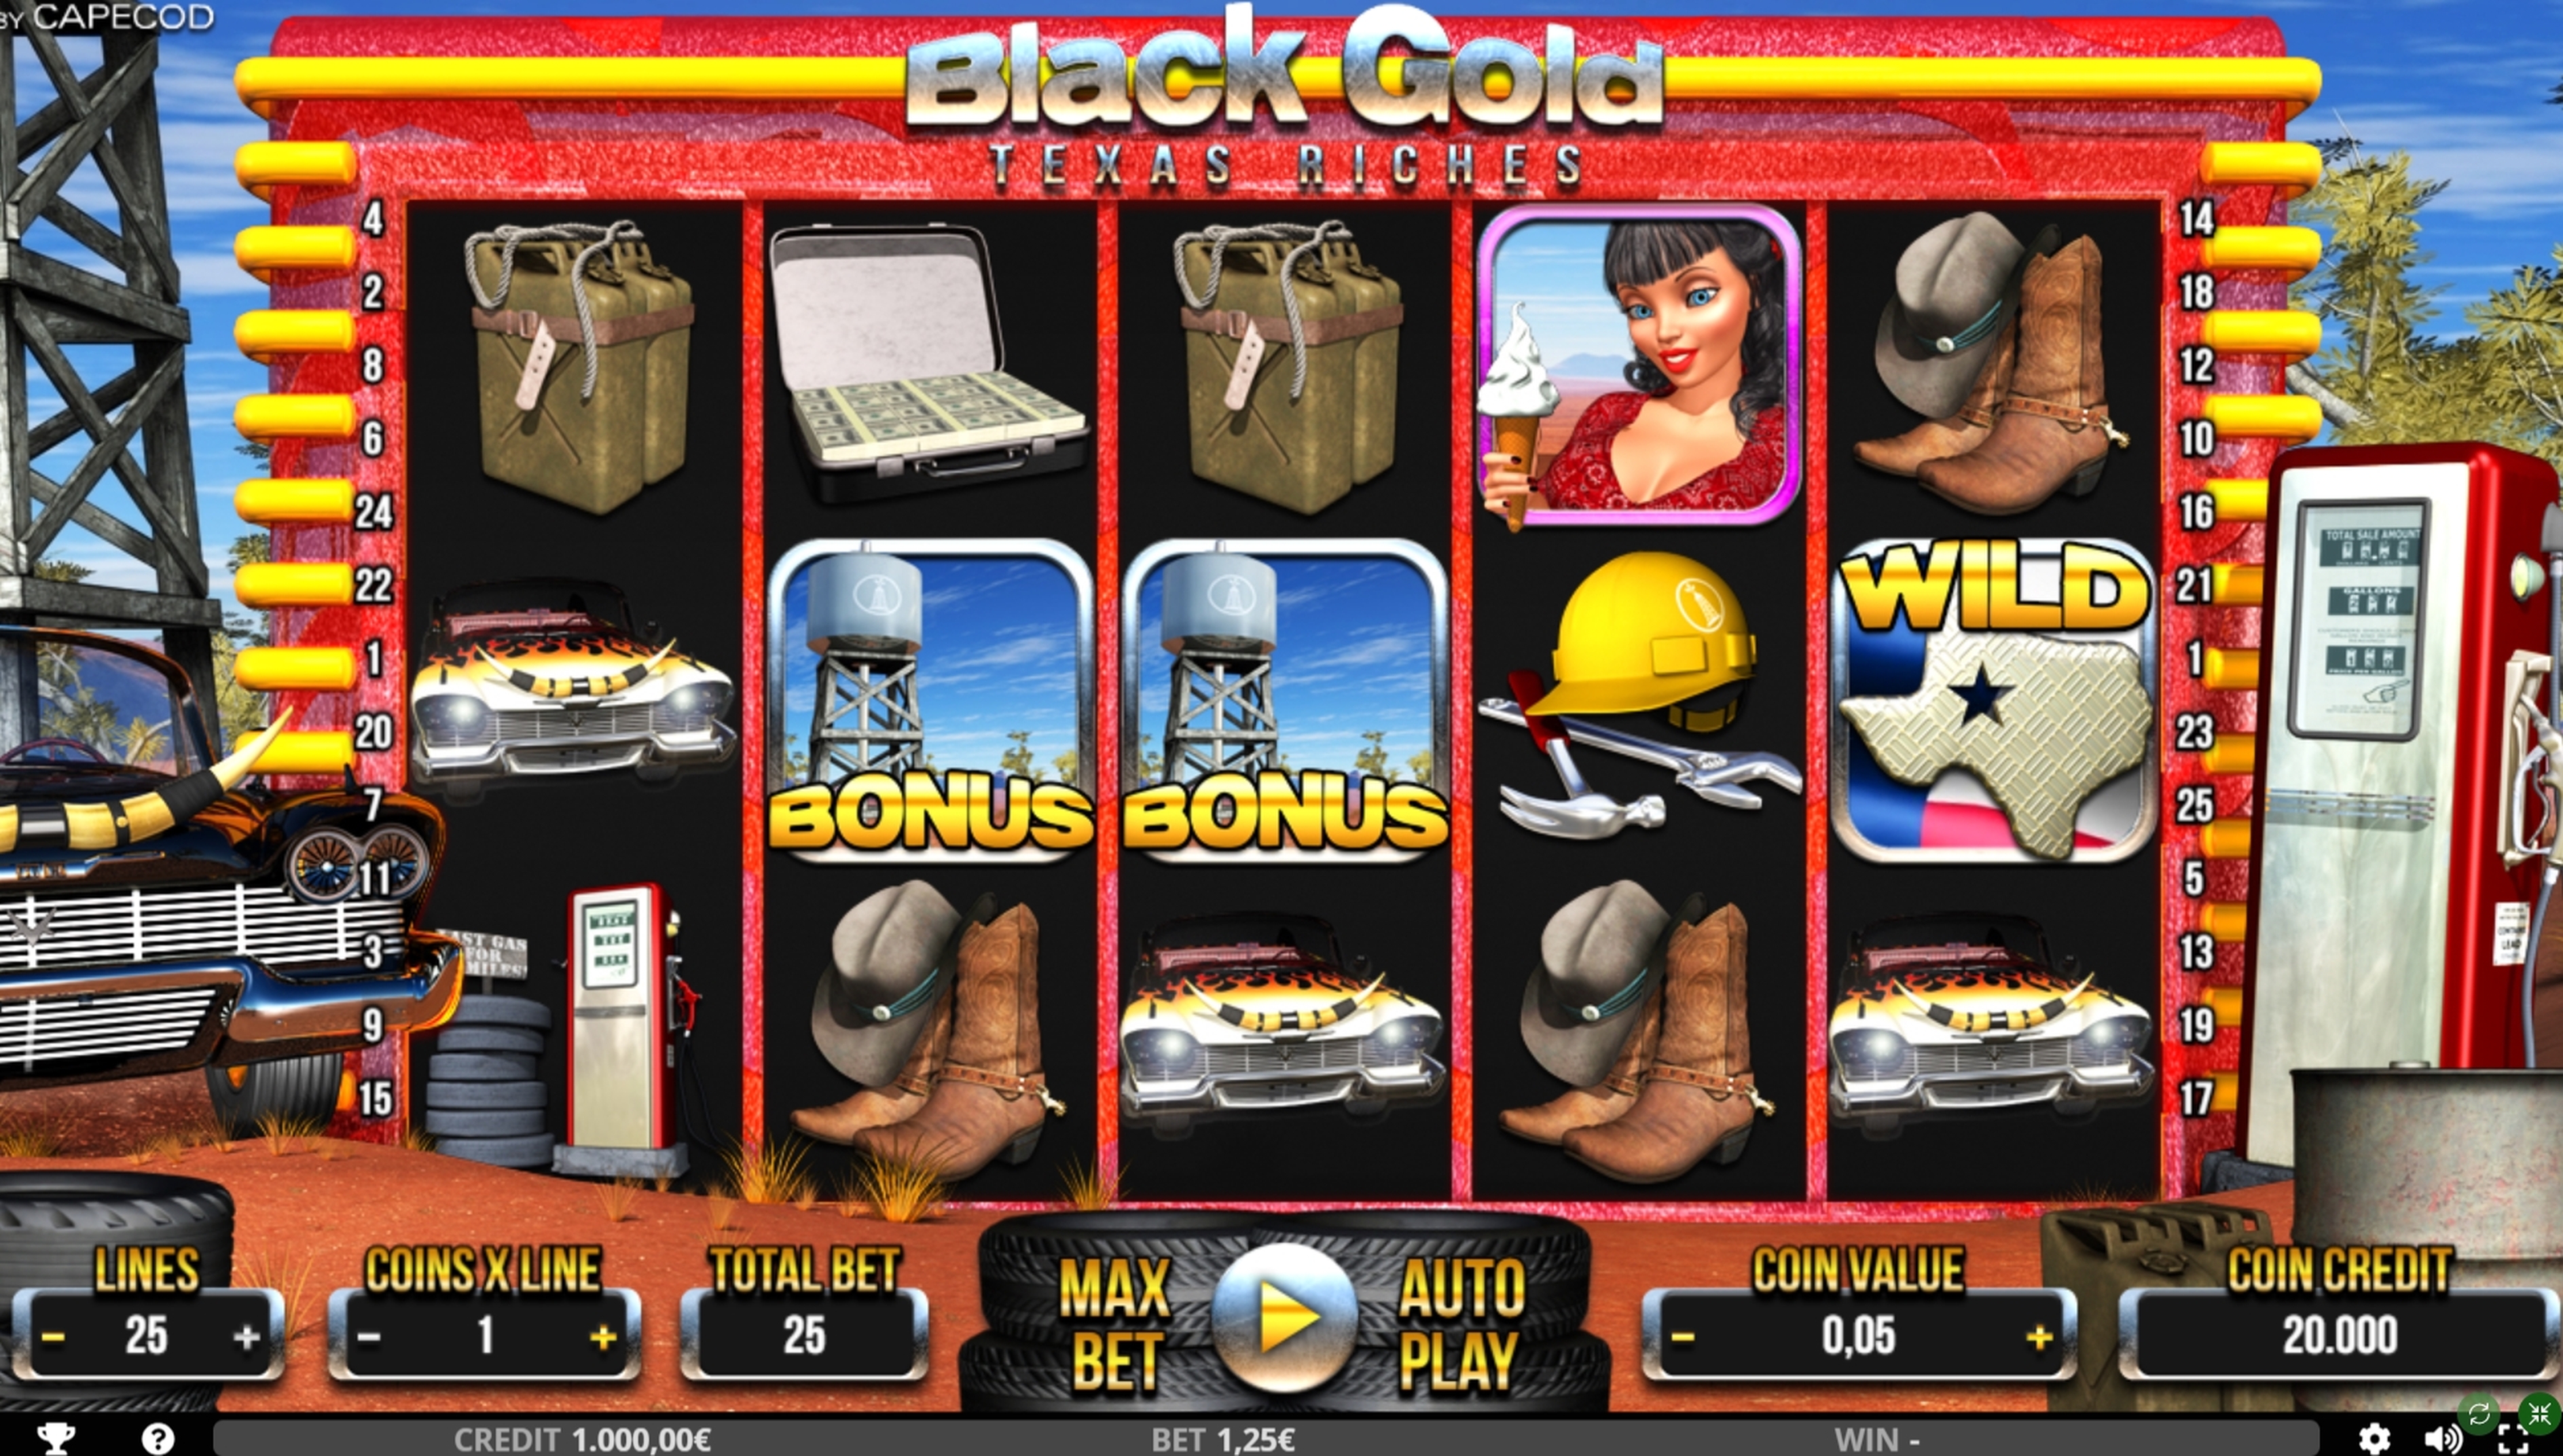 Reels in Black Gold Texas Riches Slot Game by Capecod Gaming